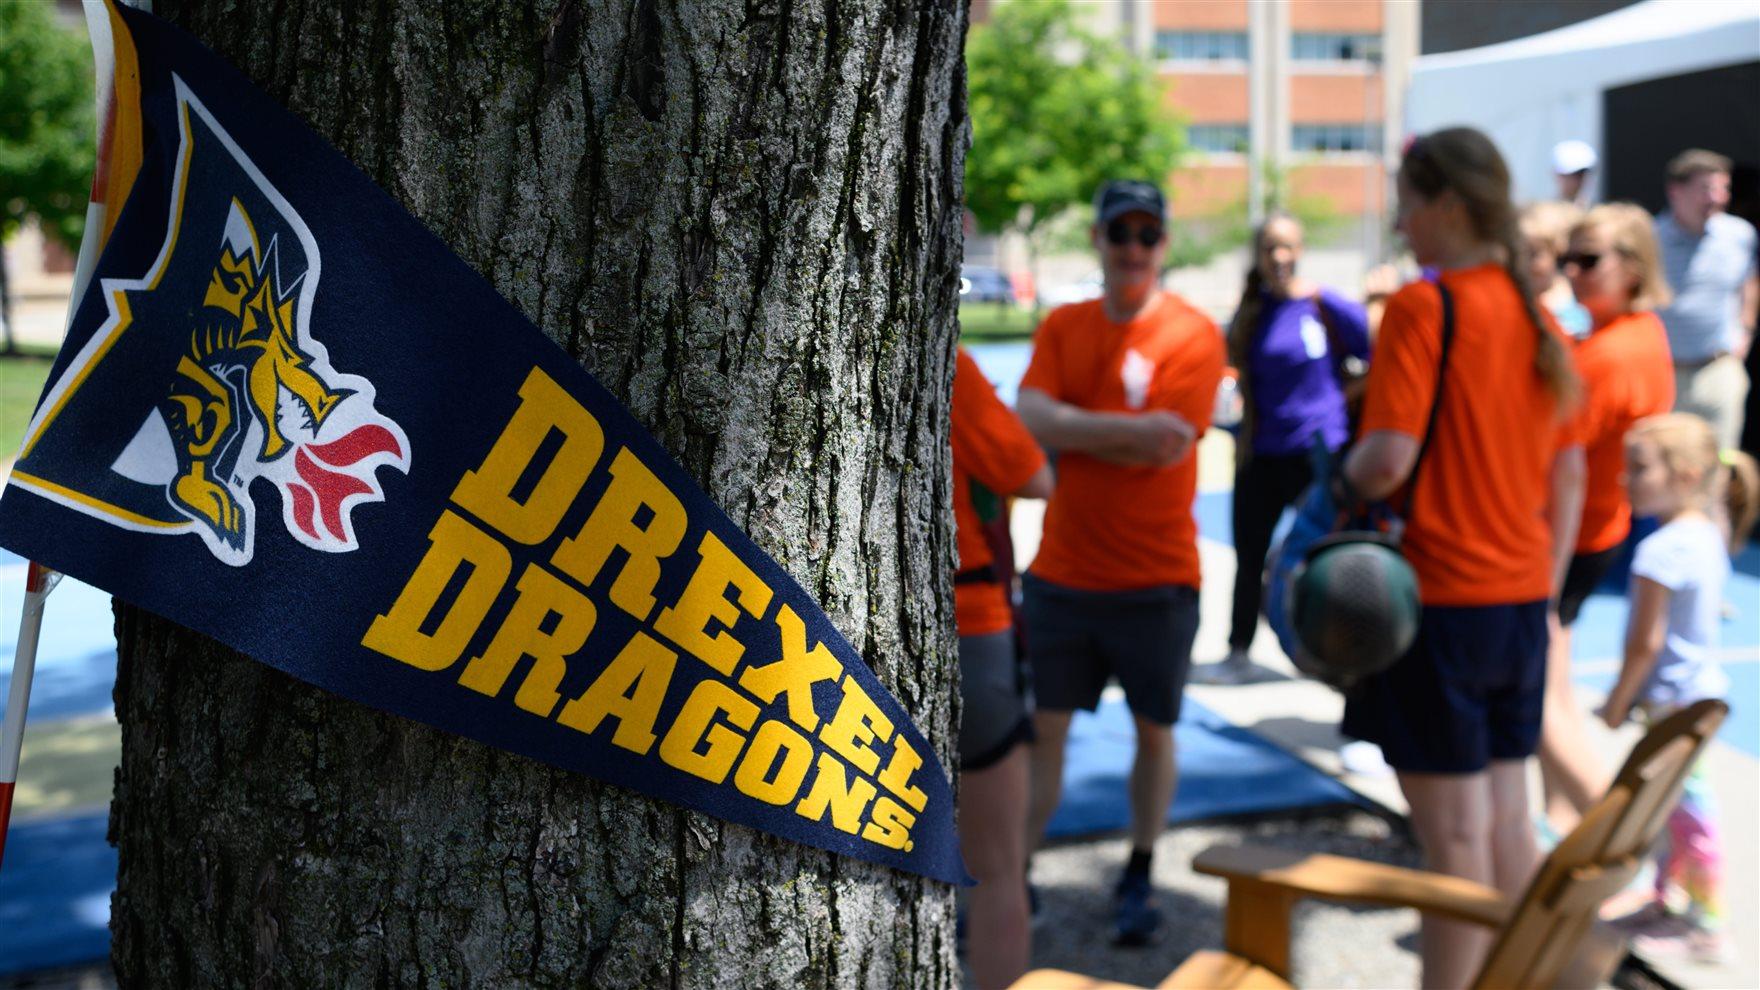 A "Drexel Dragons" flag pinned to a tree as participants of Employee Olympics gather in the background.